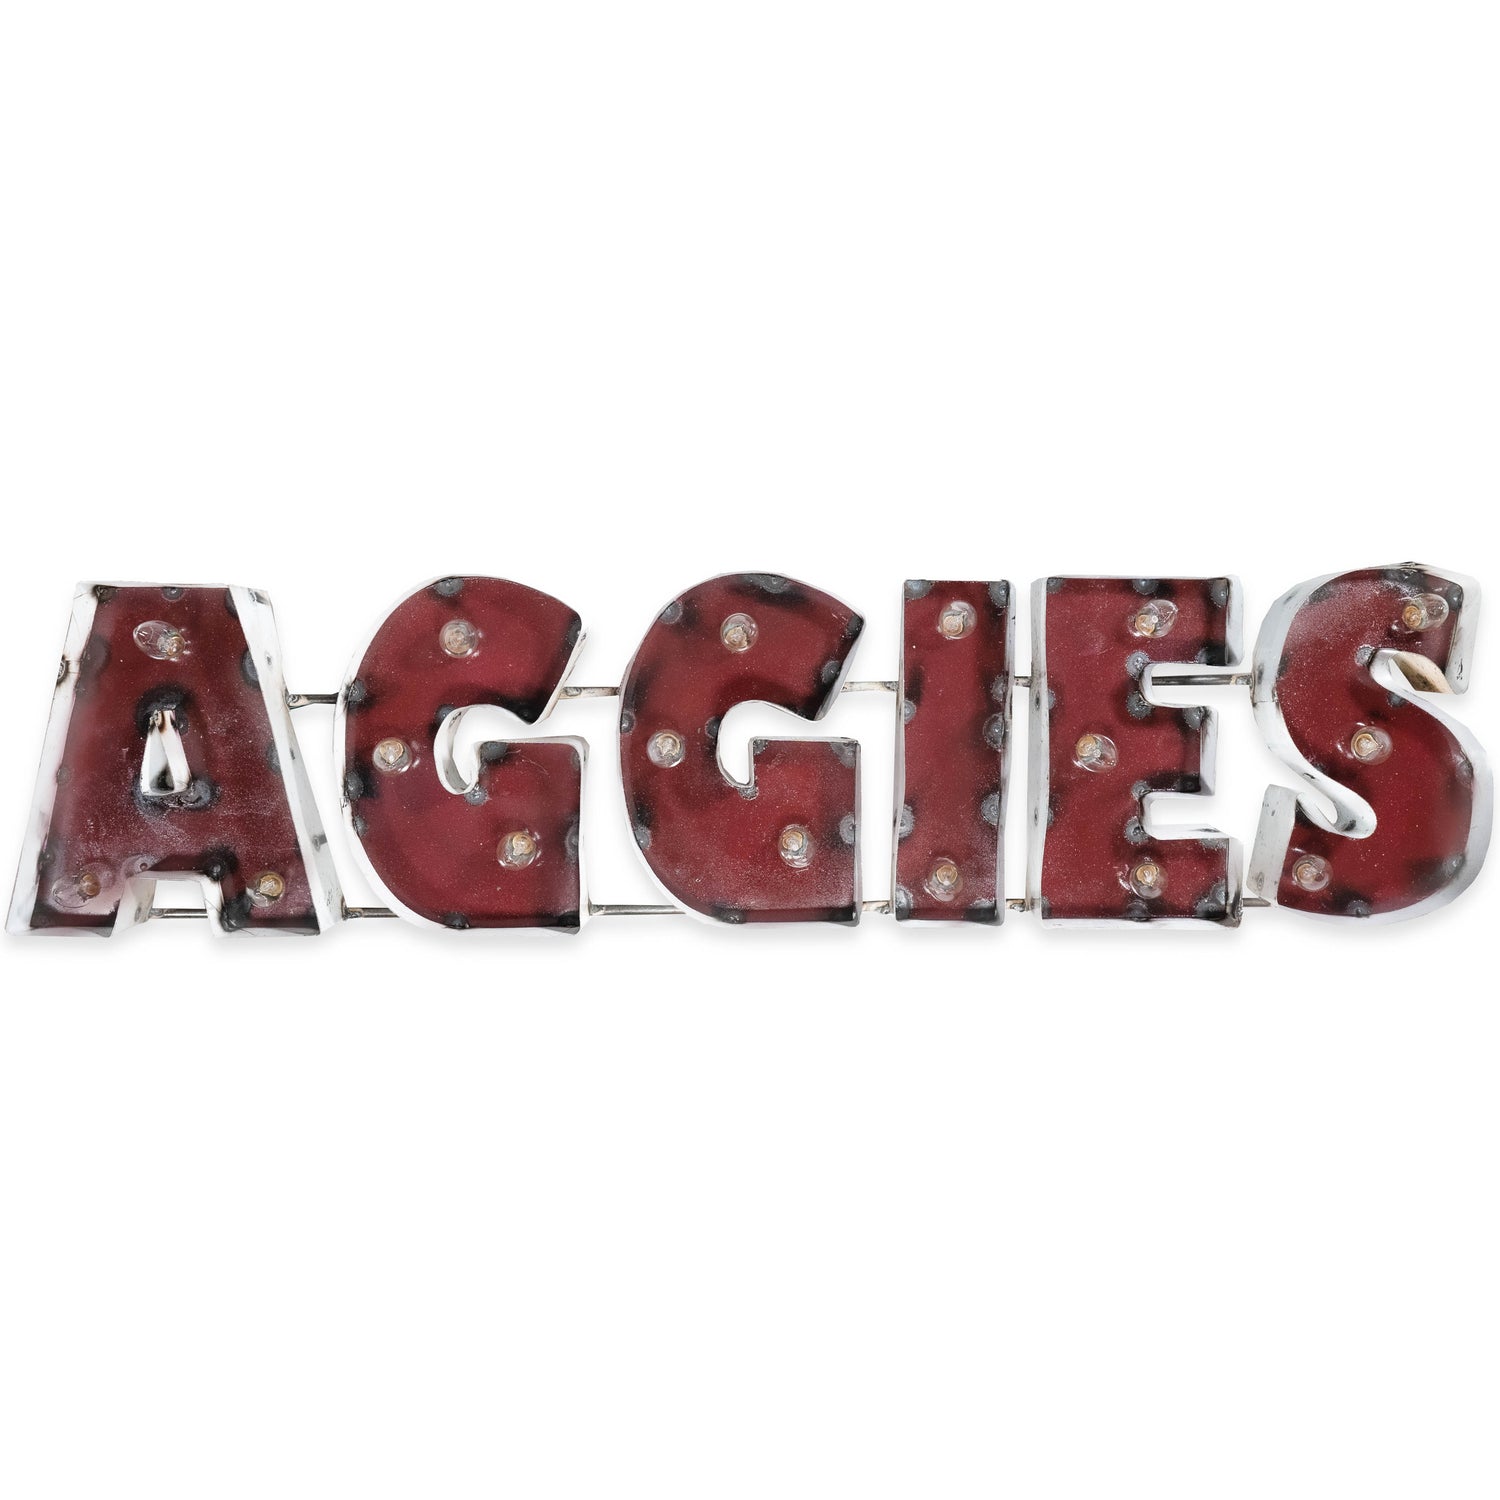 Block Aggies Metal Sign With Lights